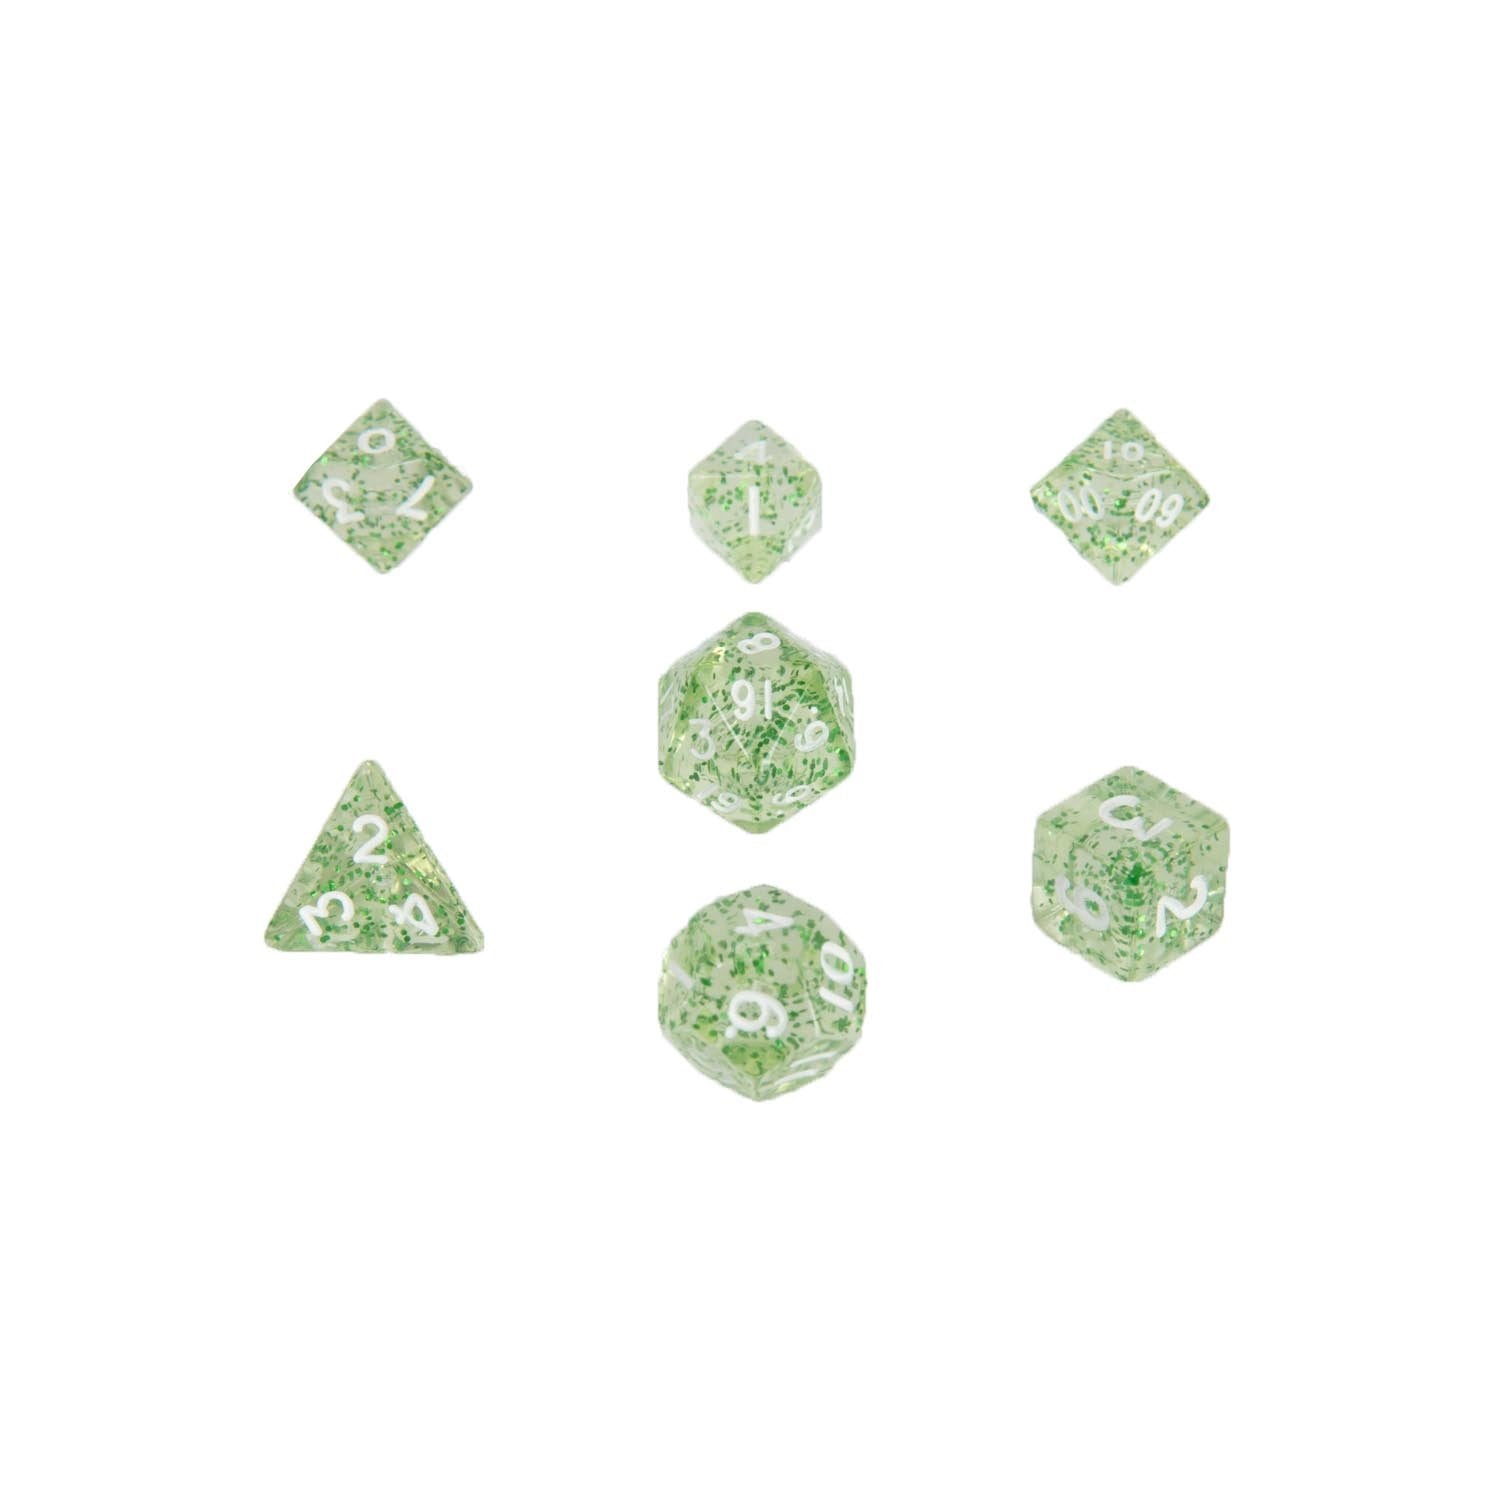 MDG 4205 Ethereal Green with White Mini RPG Dice | Grognard Games